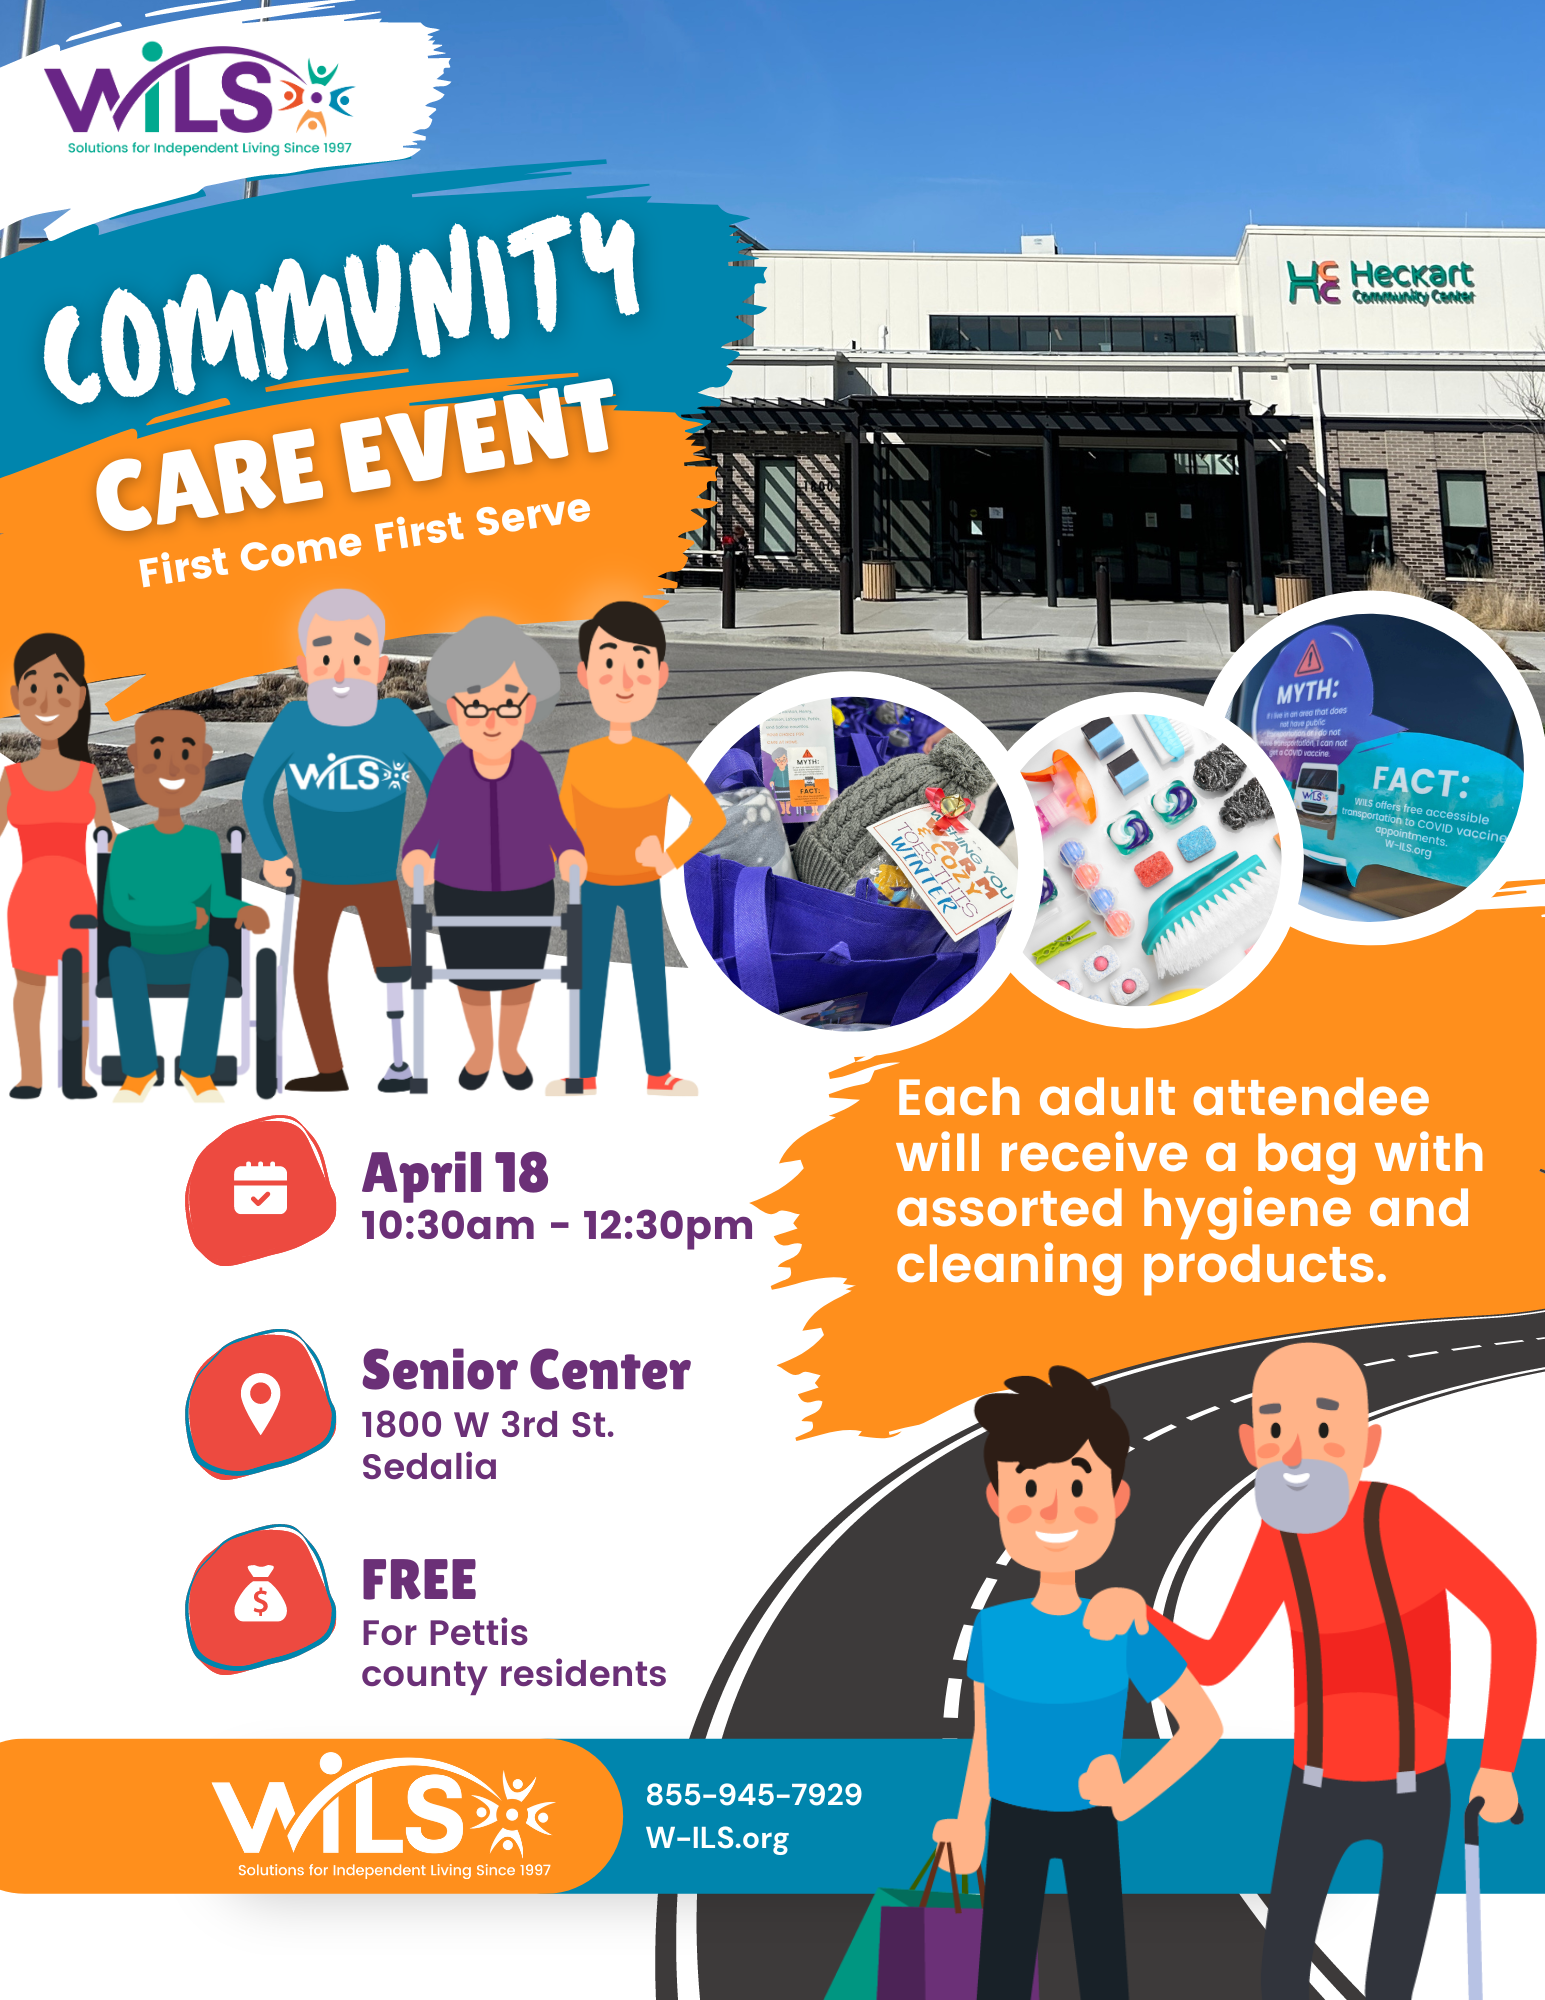 Community Care Event April 18 at the Senior Center FREE 10:30am - 12:30pm 1800 W 3rd St, Sedalia, MO For Pettis county residents. First come, first serve.